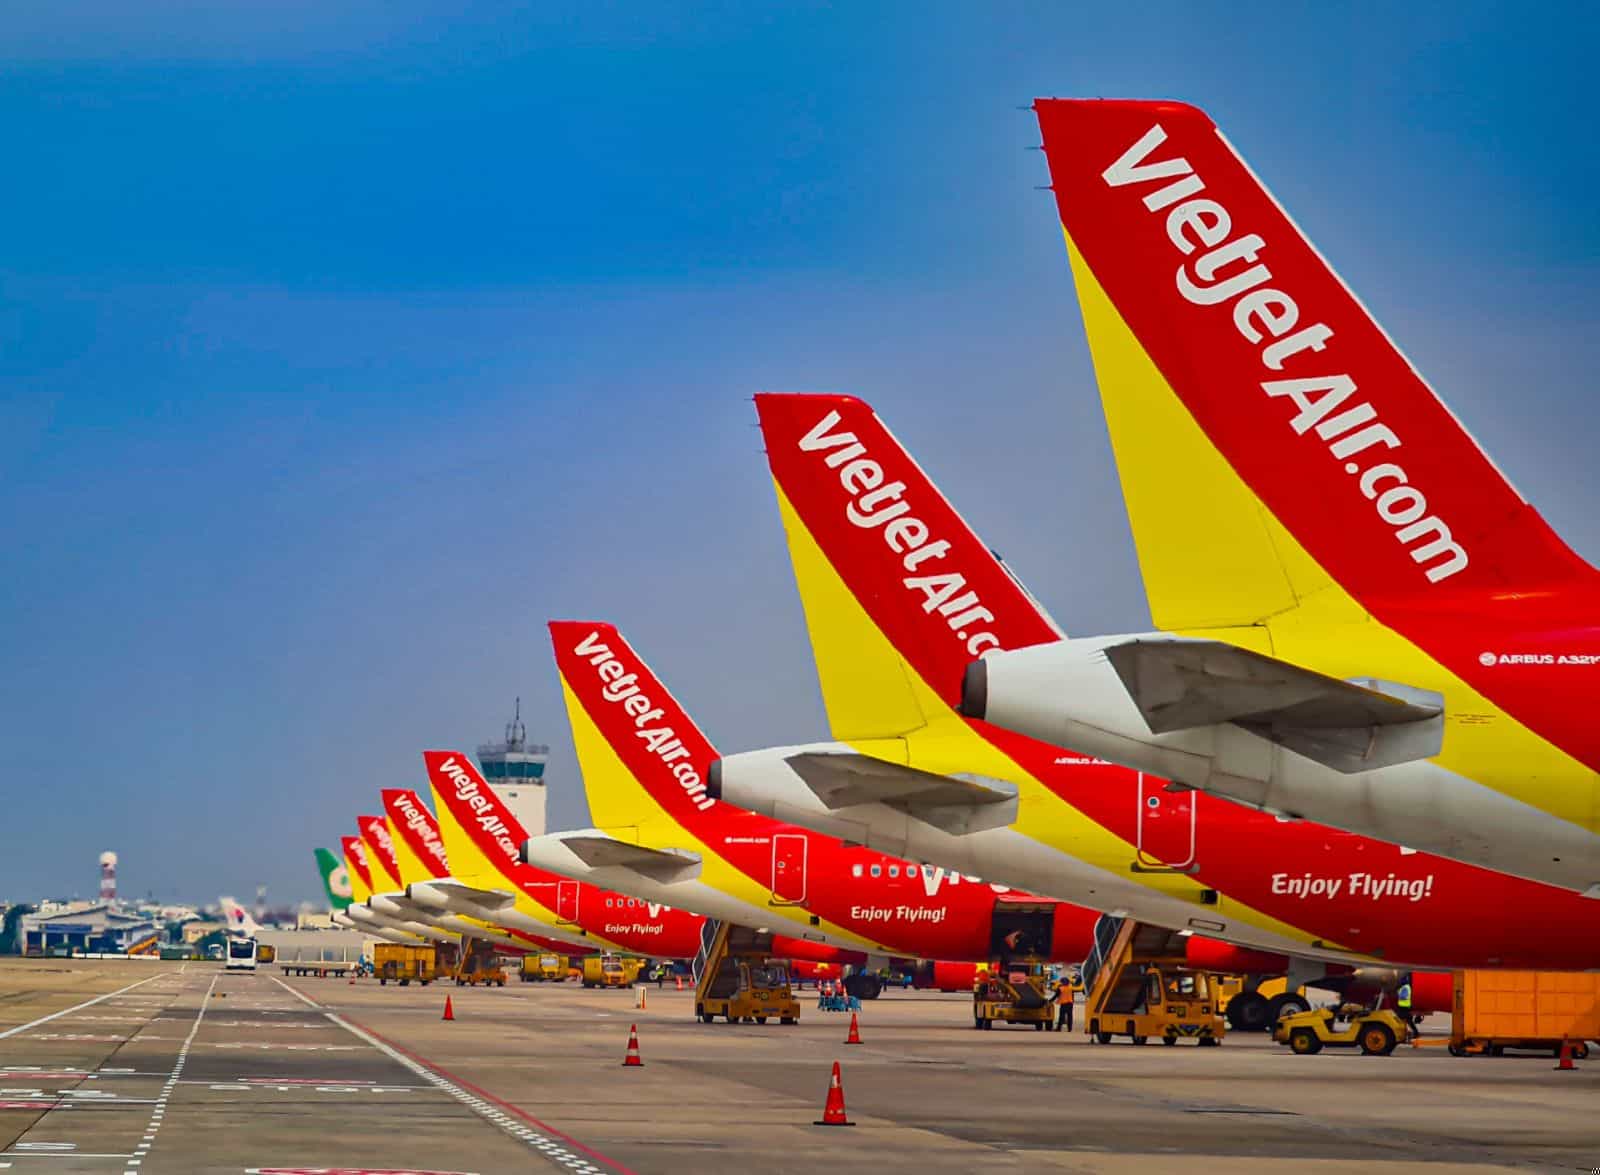 Vietjet to extend the weekly promotion and offer “Real Deal” for business services